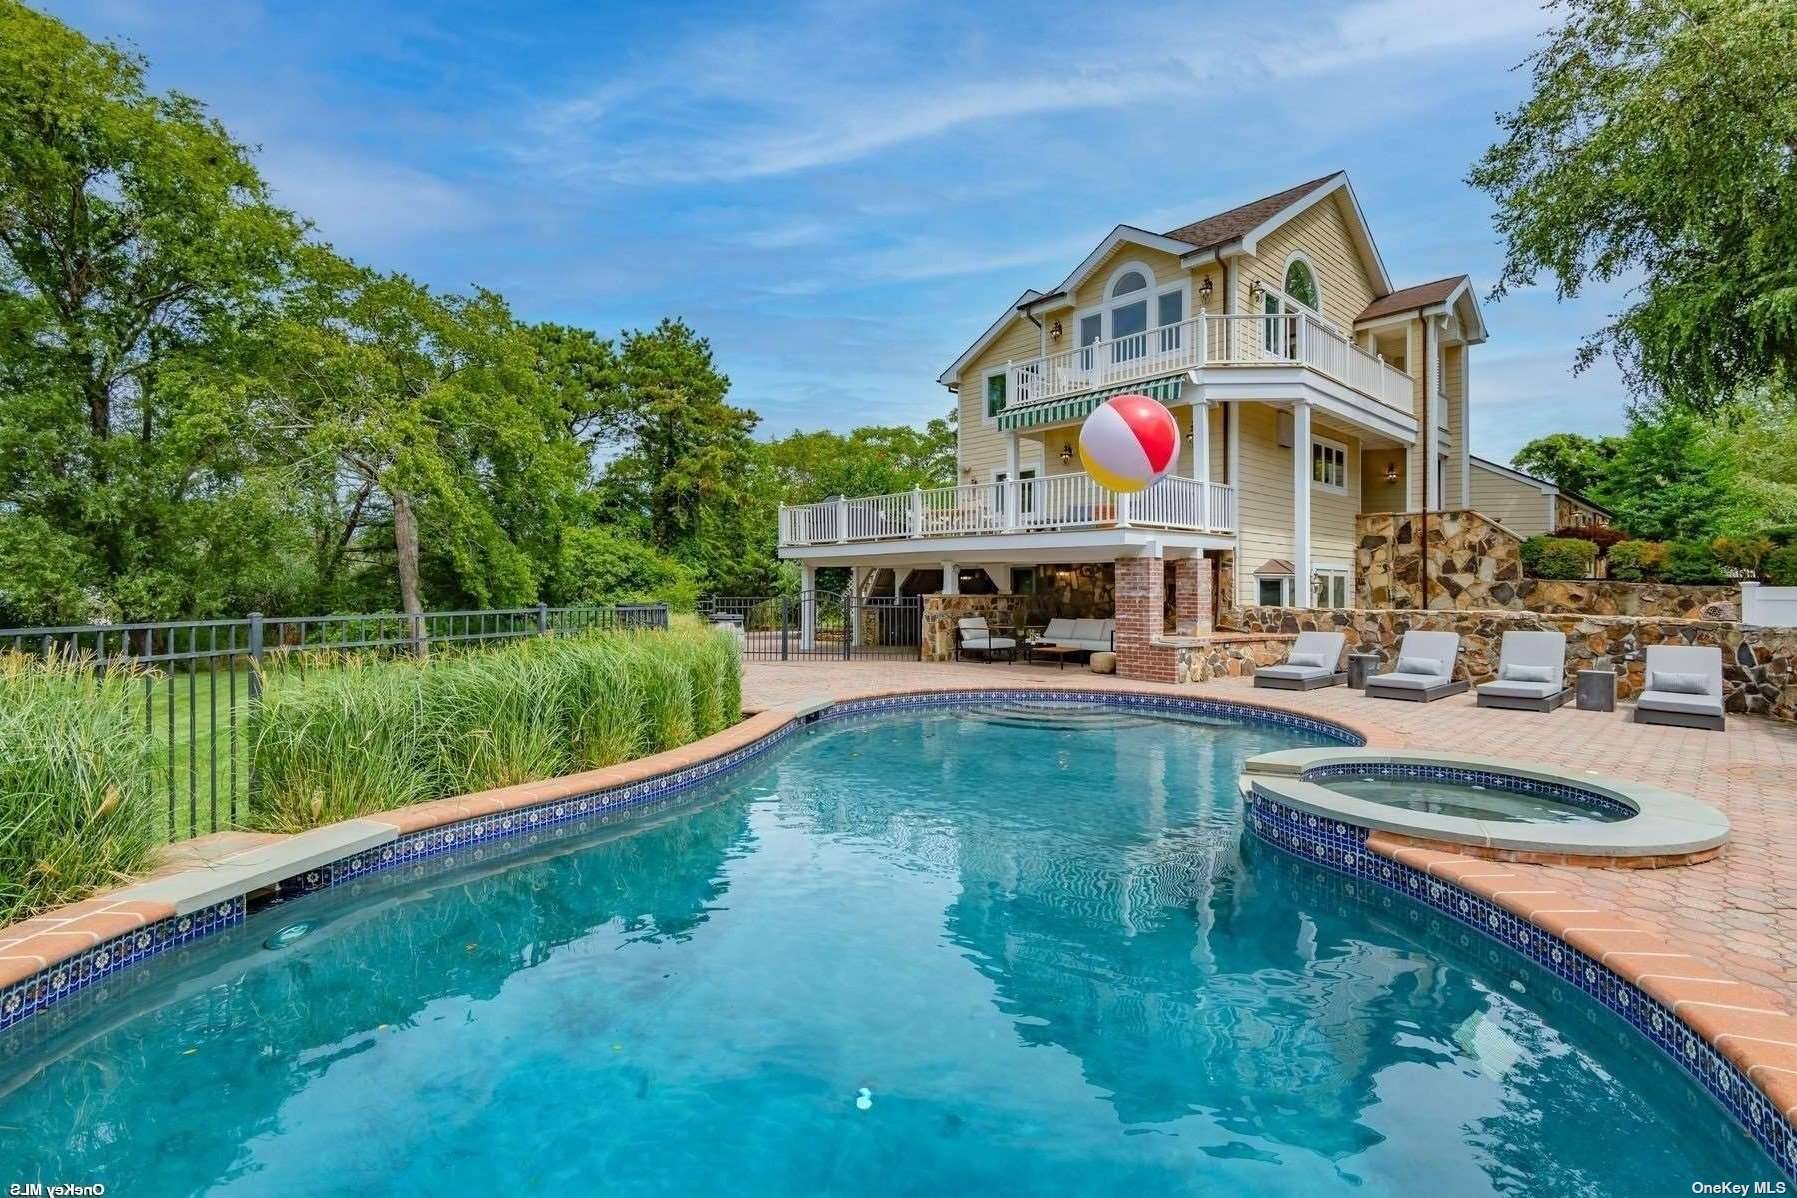 Luxury Living in this resort style home located in Hampton Bays.